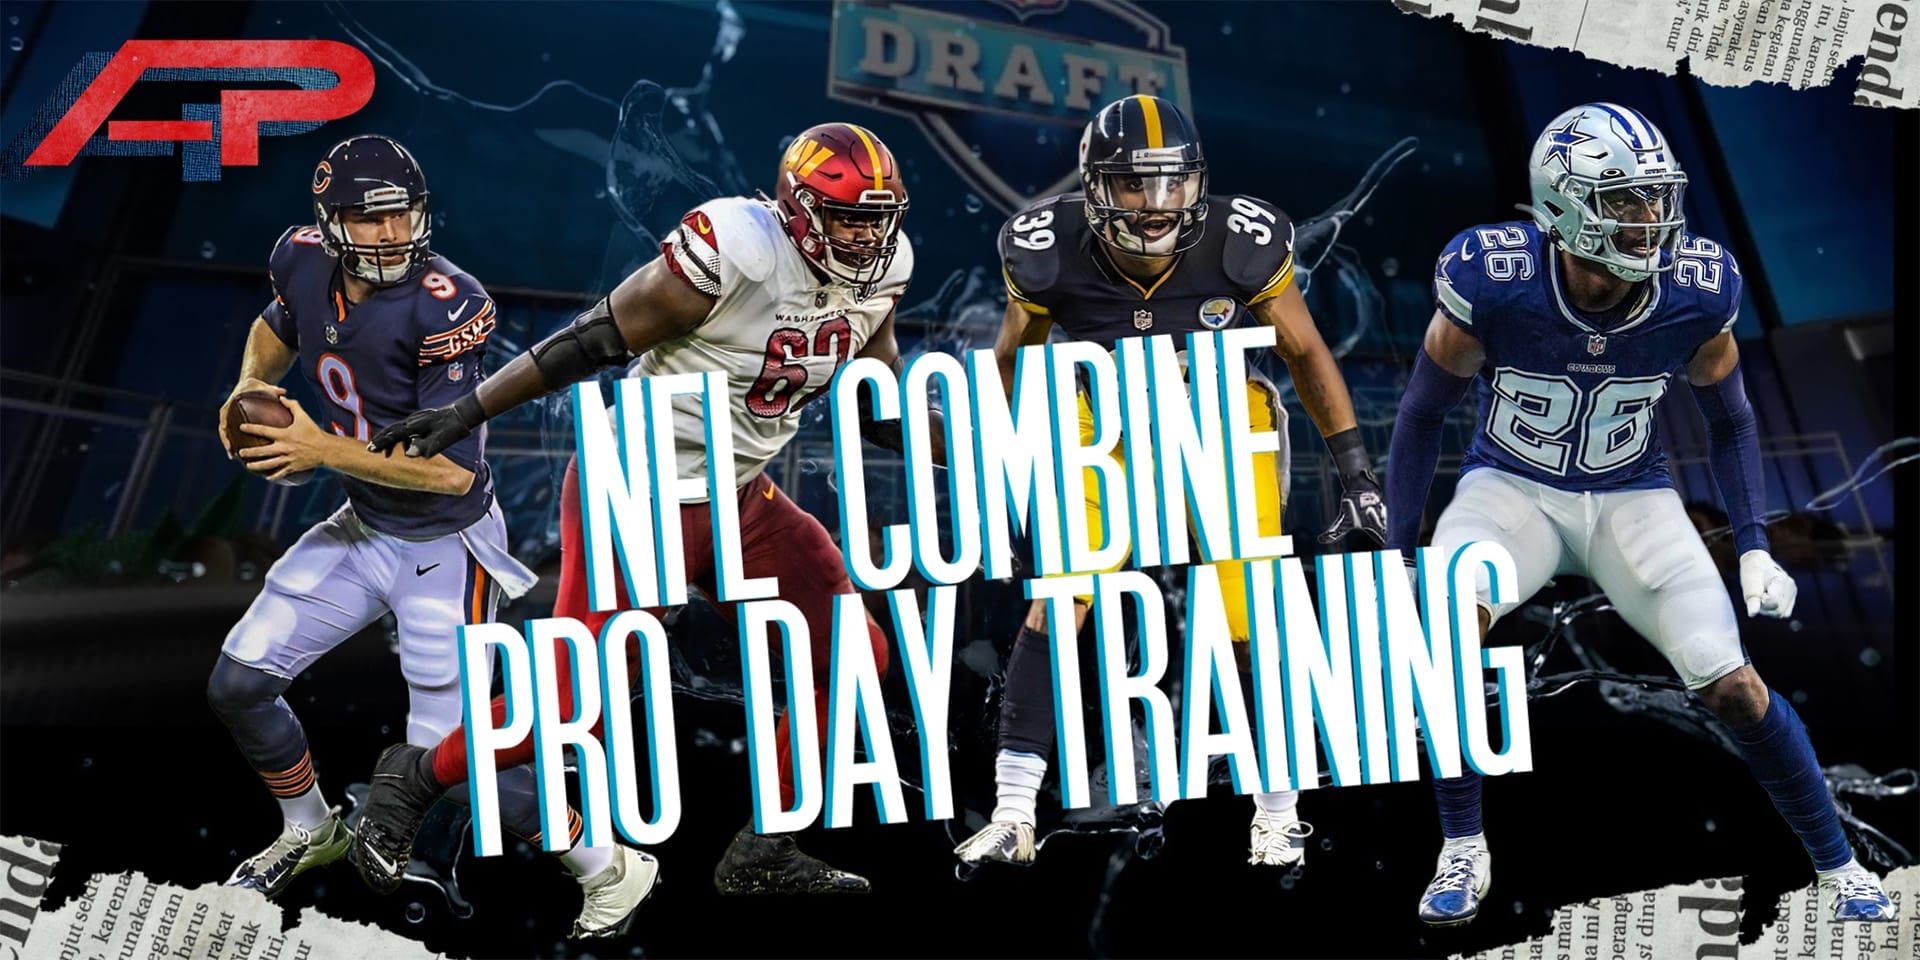 NFL Combine Training classes at Athletic Performance Training